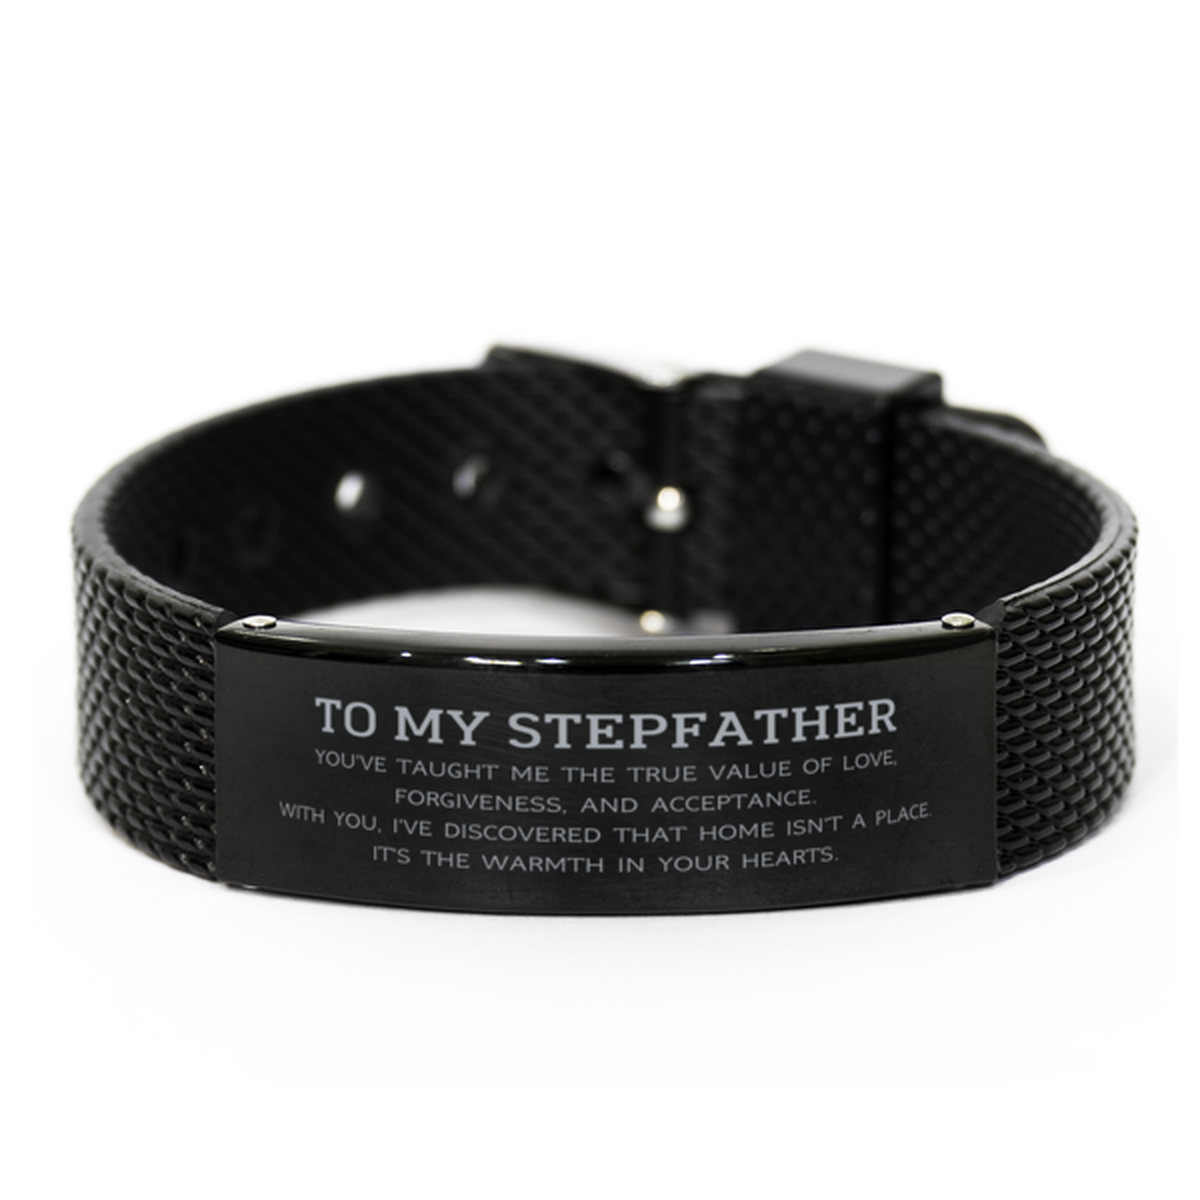 To My Stepfather Gifts, You've taught me the true value of love, Thank You Gifts For Stepfather, Birthday Black Shark Mesh Bracelet For Stepfather